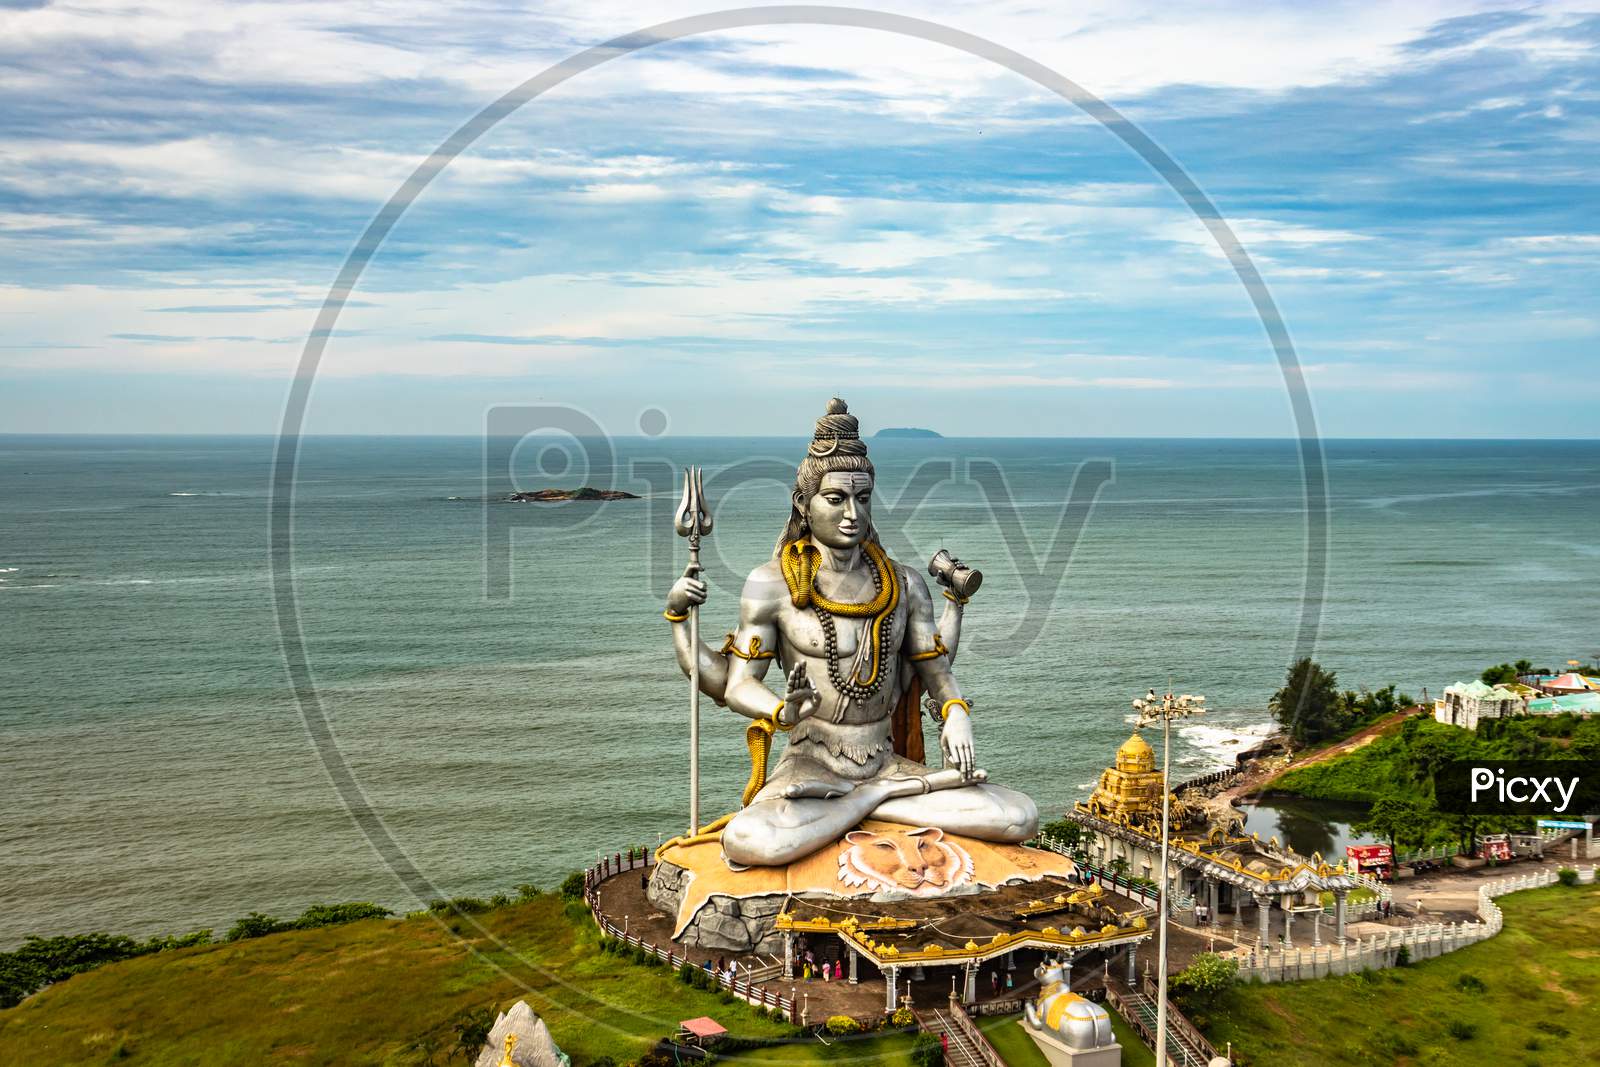 Shiva Statue Isolated At Murdeshwar Temple Aerial Shots With Arabian Sea In The Backdrop